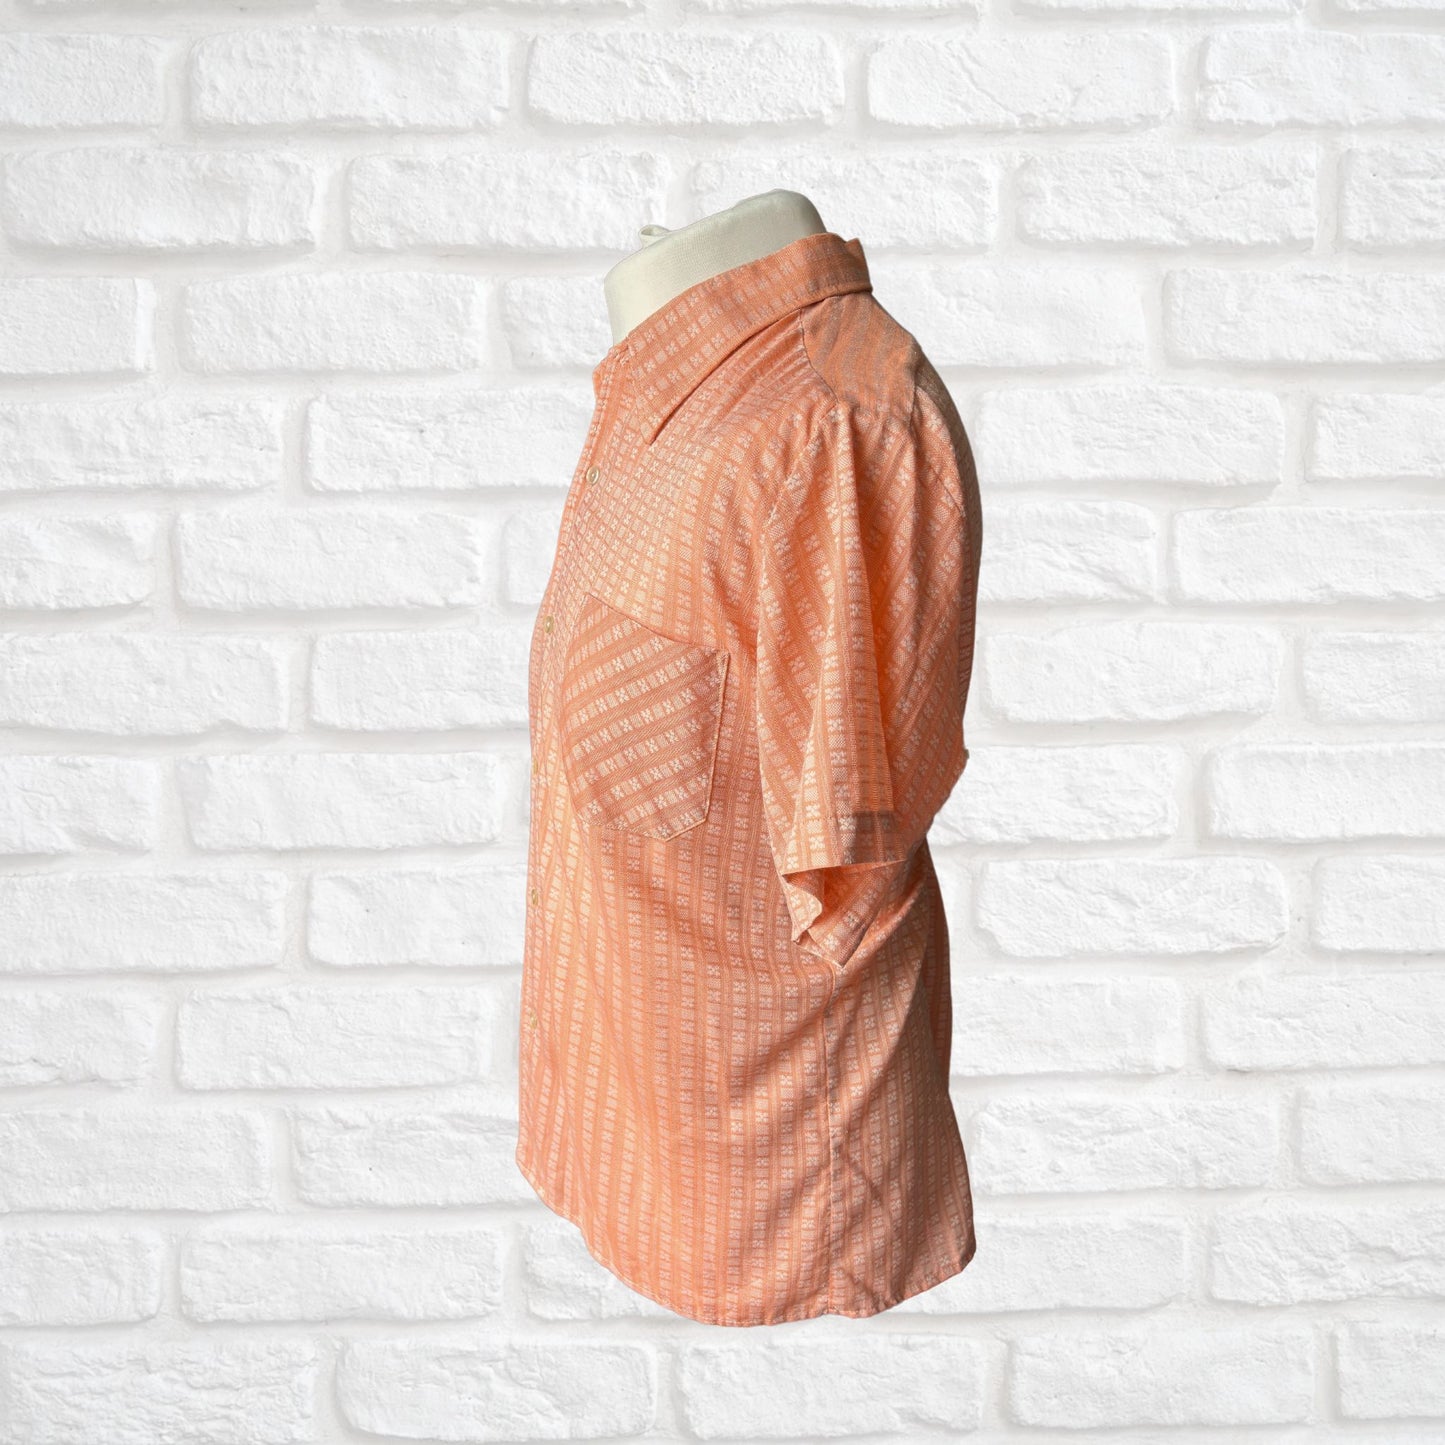 70s Vintage Peach and White Short Sleeved Shirt  - Classic Retro Style. Approx UK size L - XL (men) 18-20 (women )